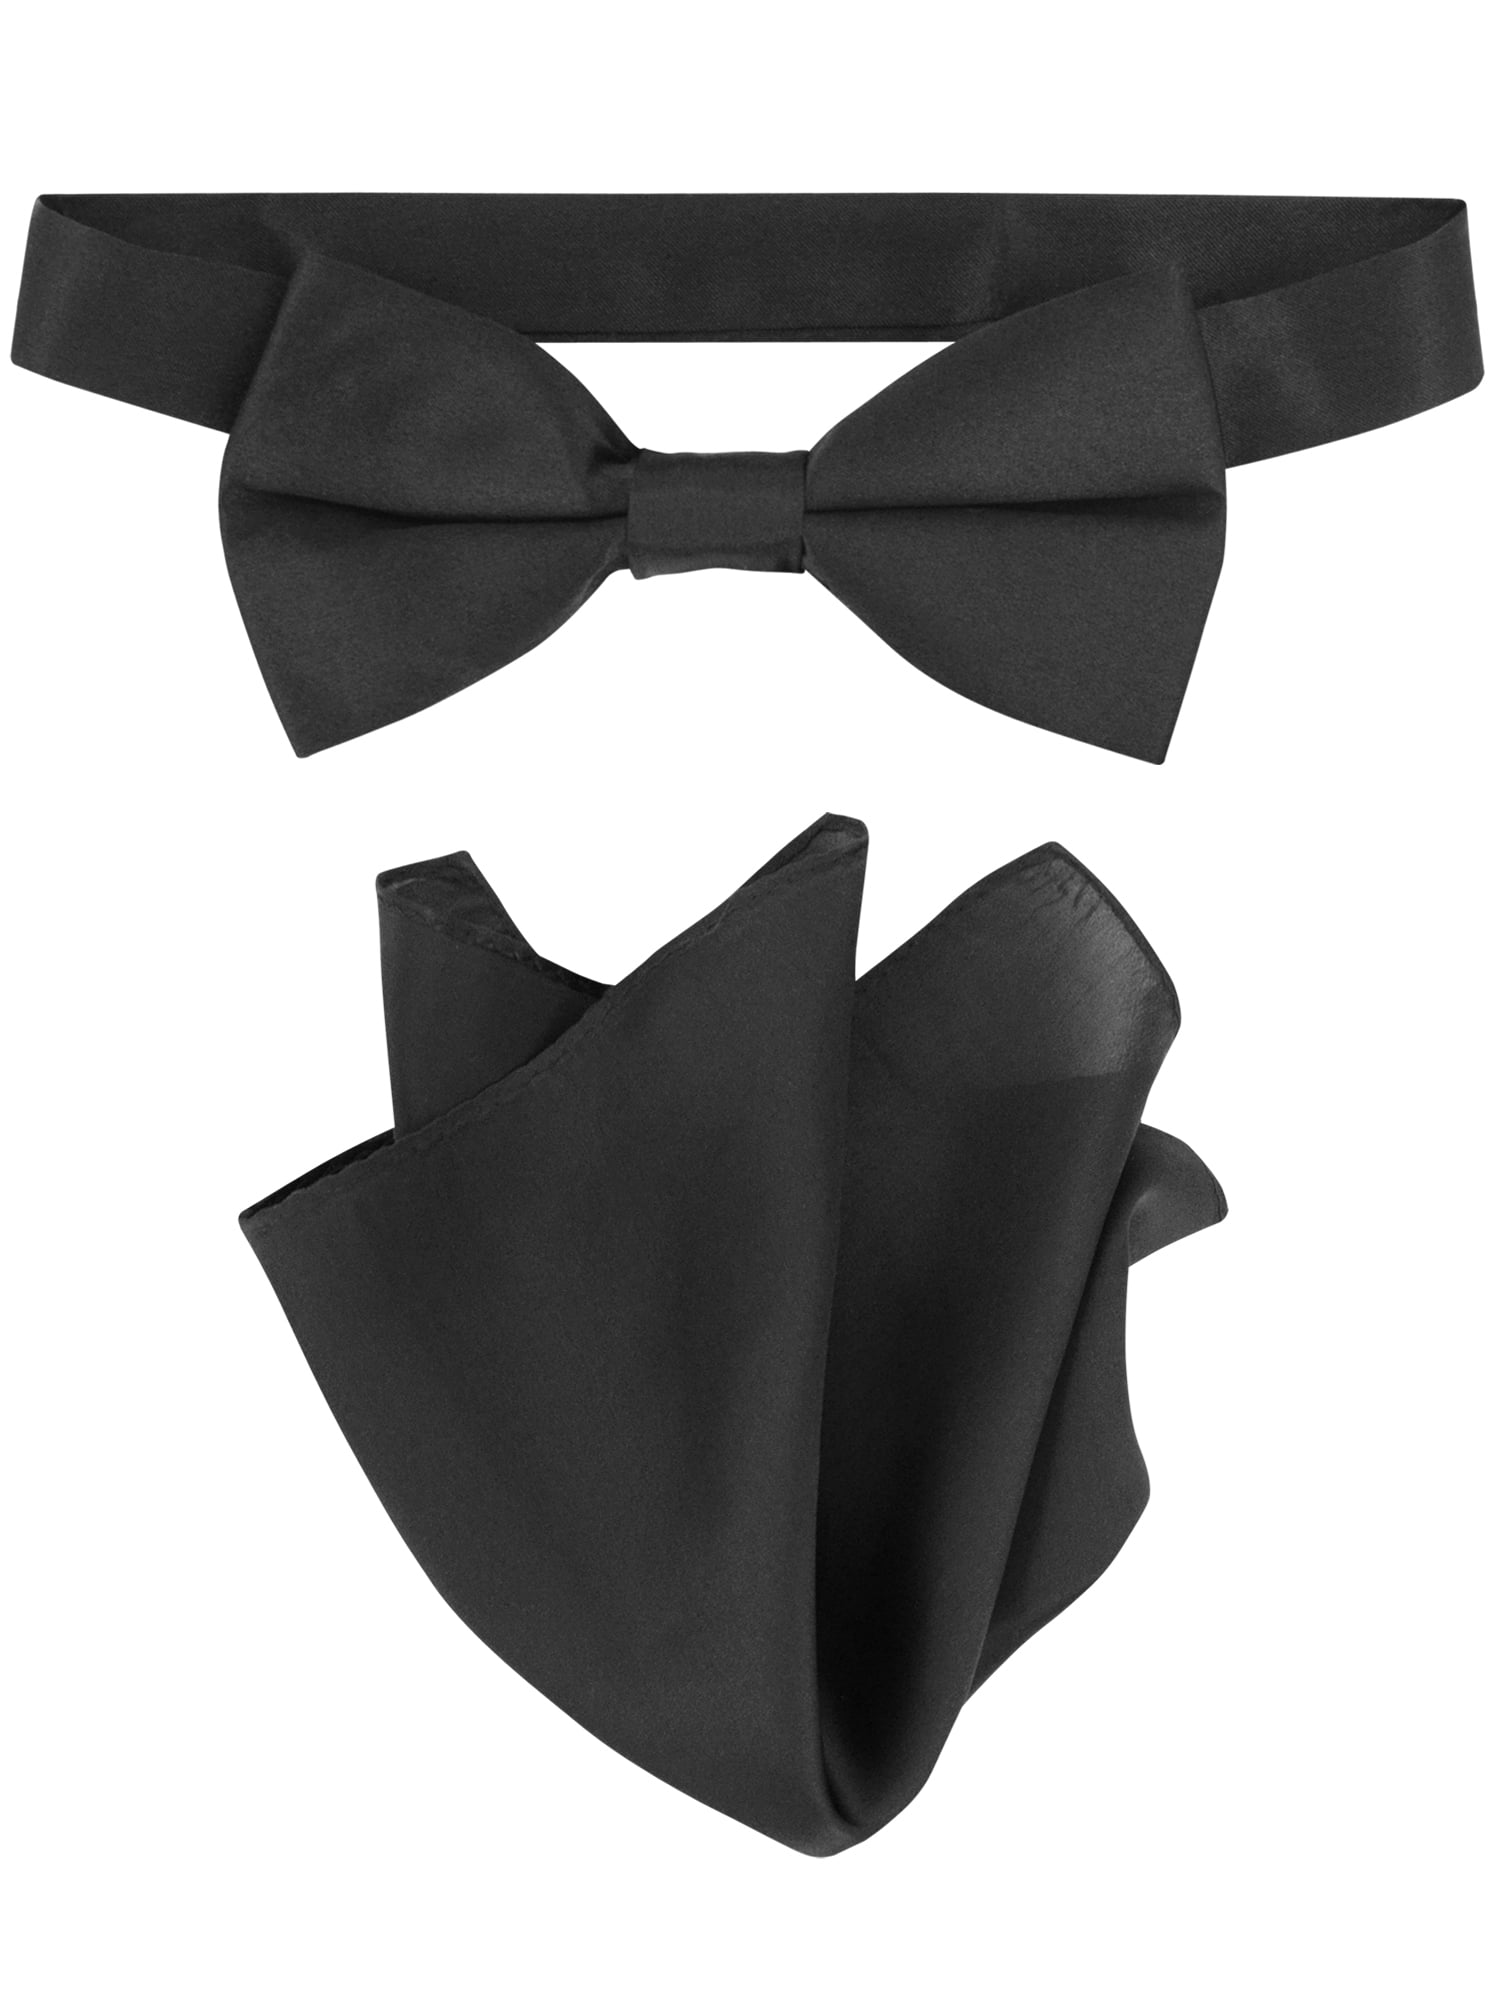 Infant Toddler Kid Teen Boy Wedding Formal Party Satin Black Red Bow Tie sz S-20 